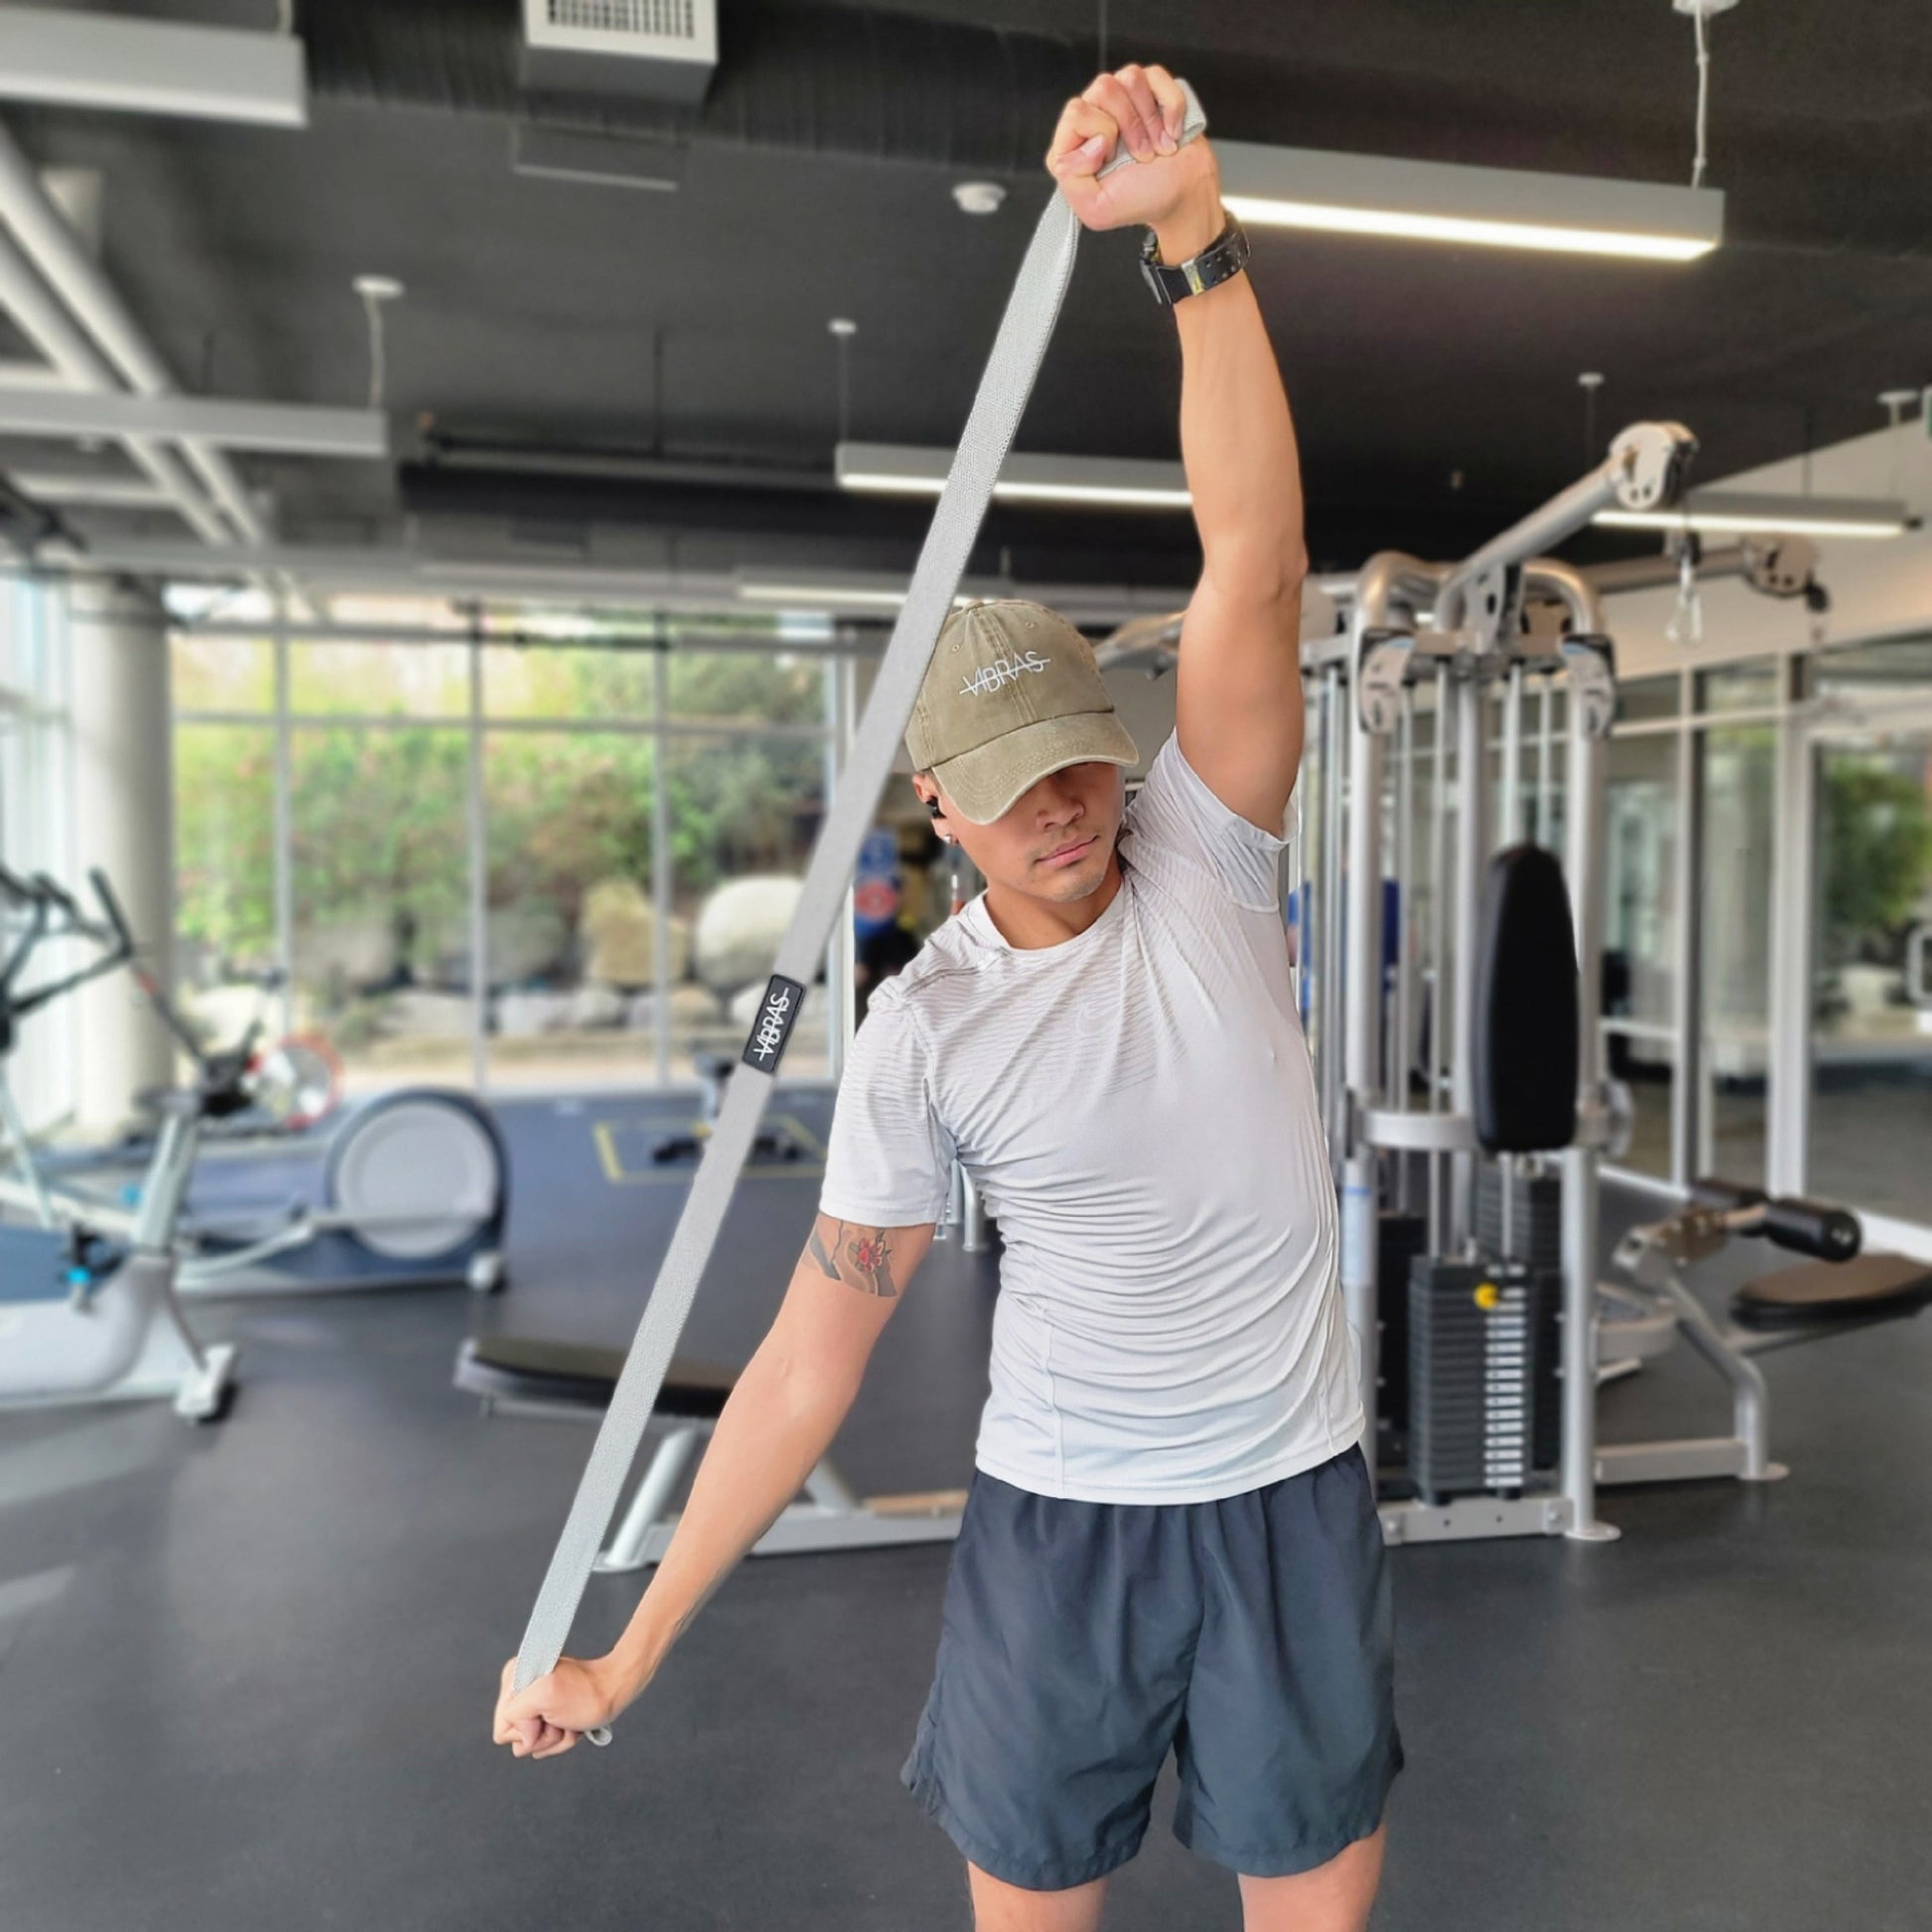 man using long resistance bands from vibras activewear at the gym to stretch his upper body 